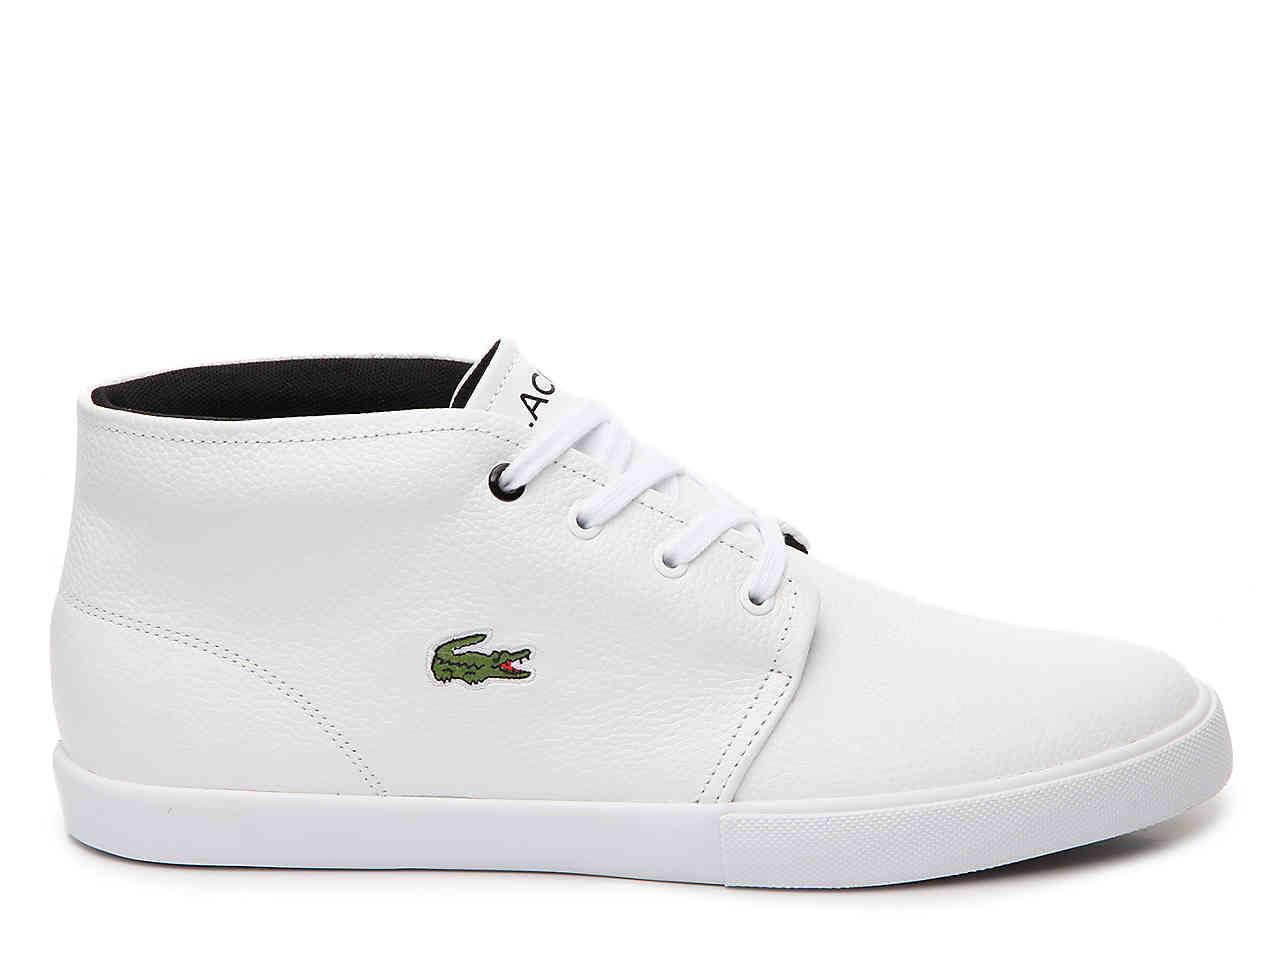 Lacoste Leather Asparta Mid-top Sneaker in White for Men - Lyst